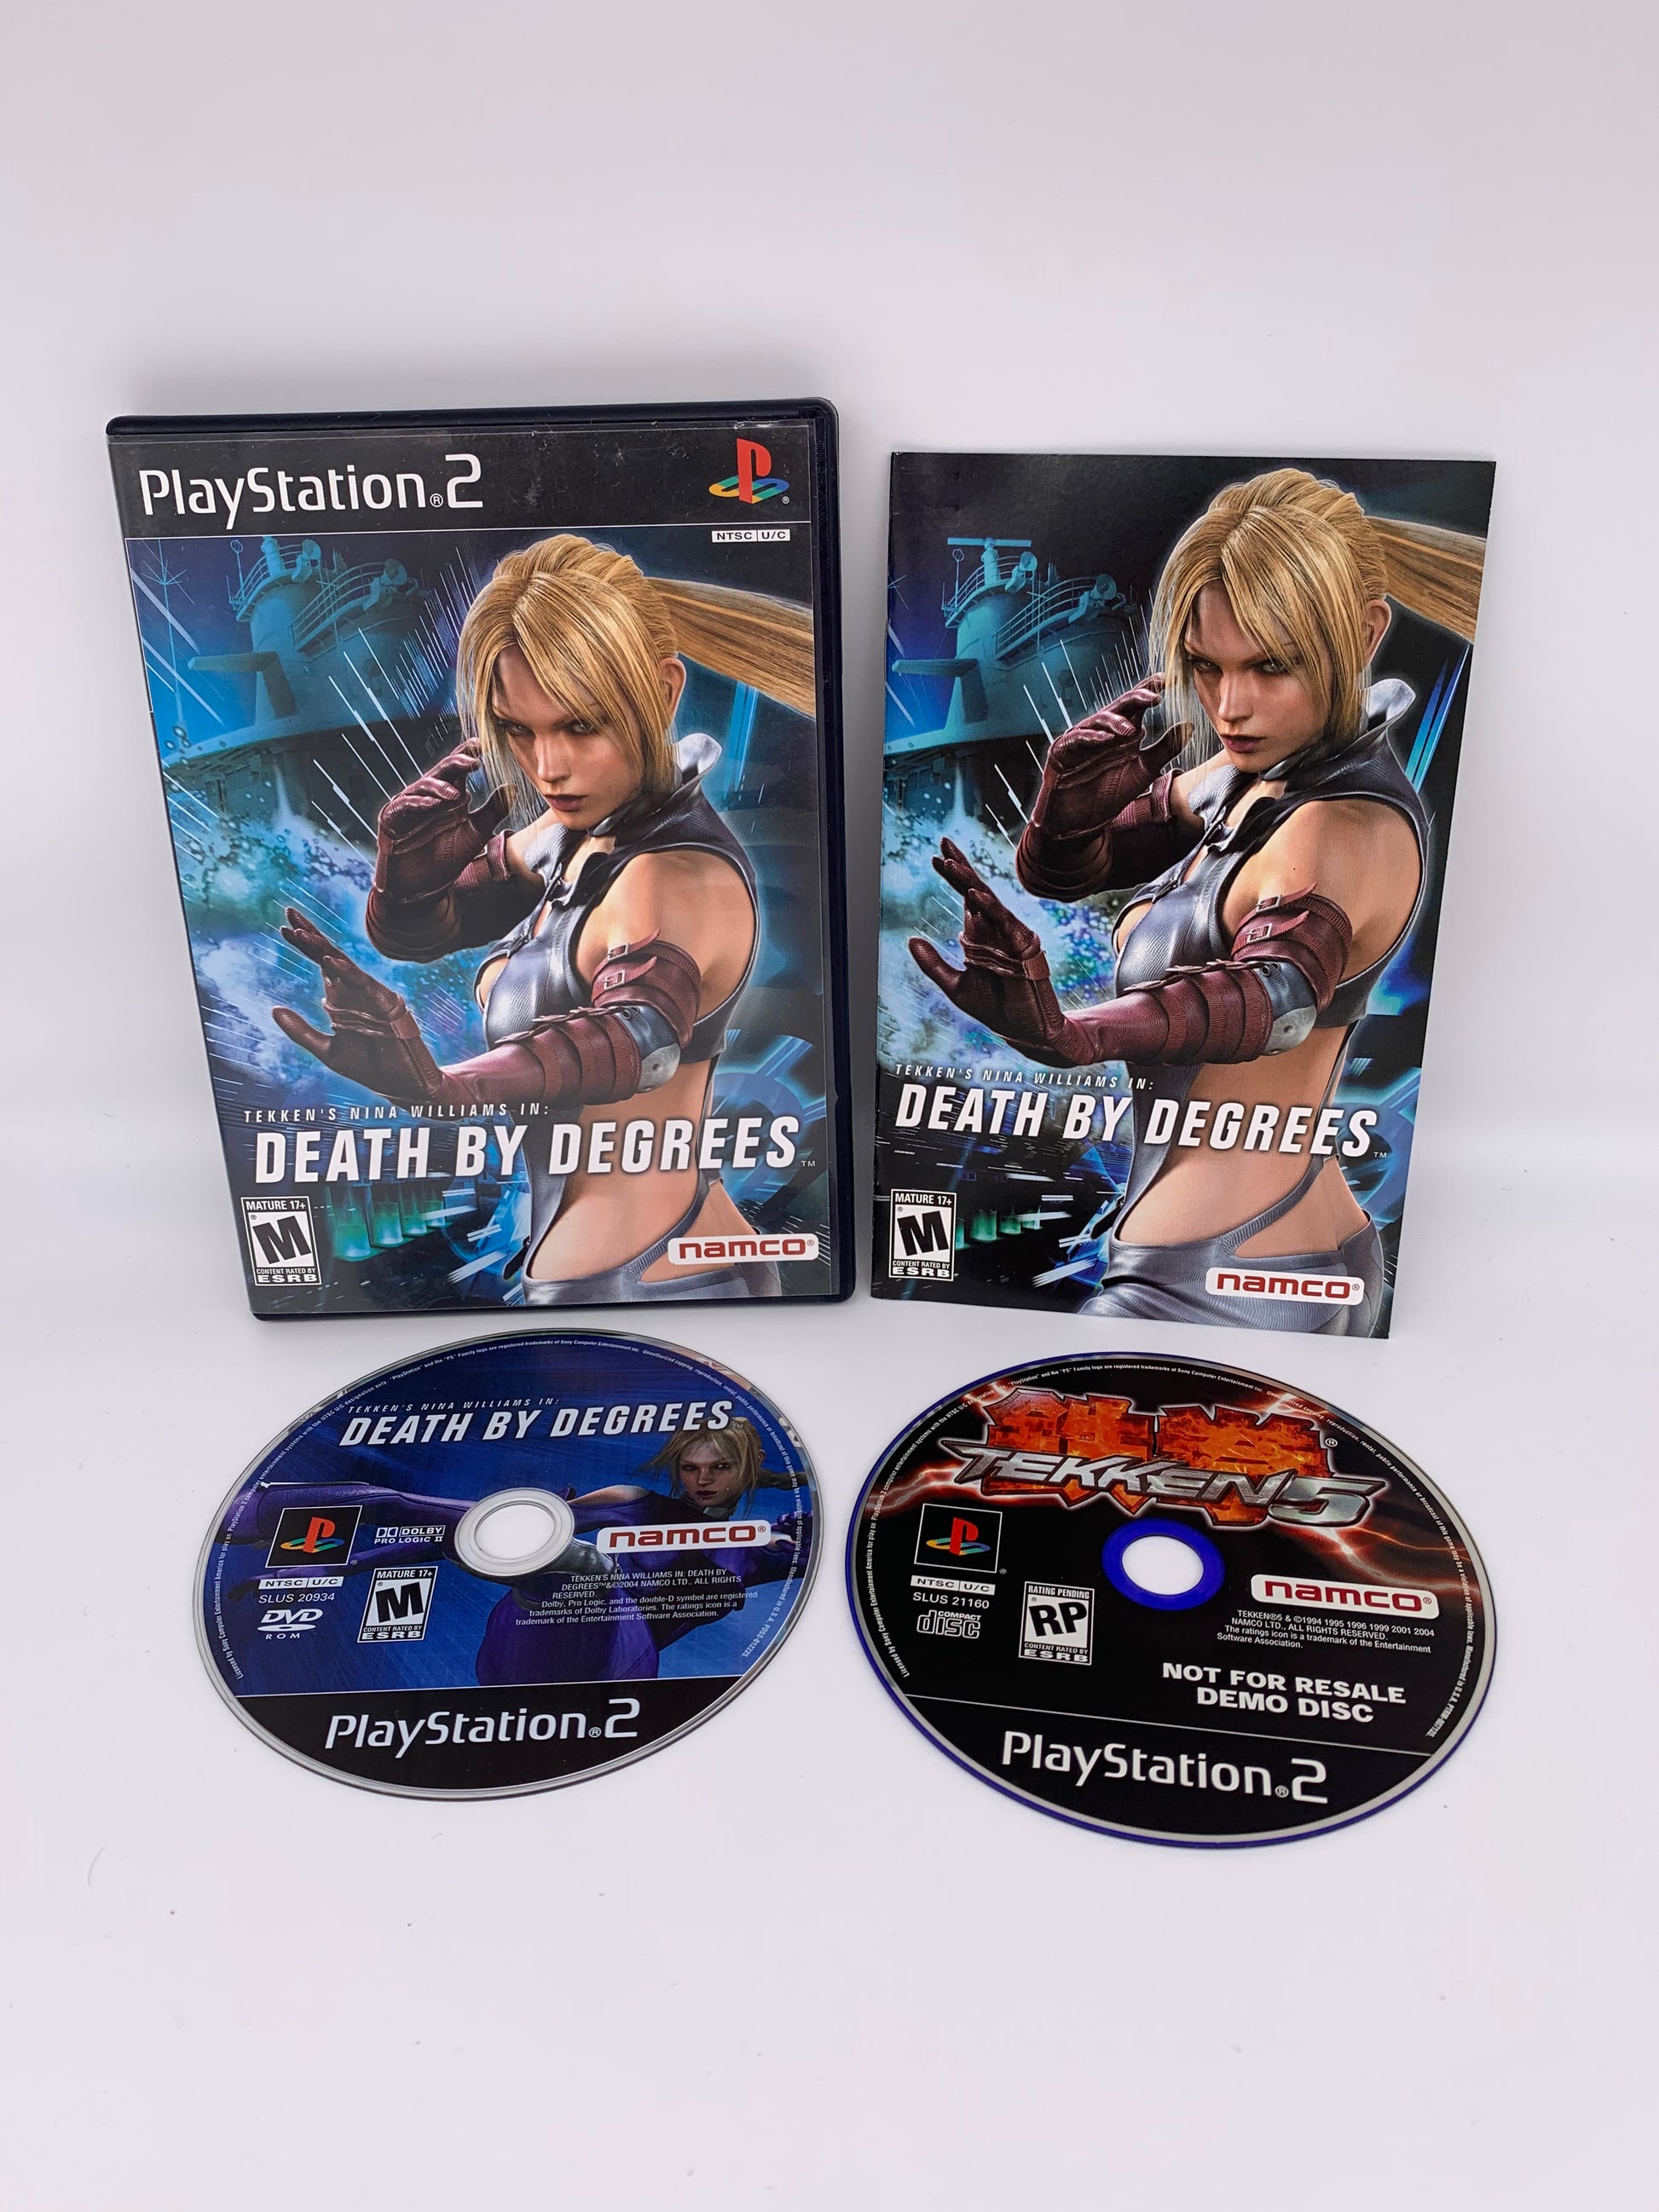 PiXEL-RETRO.COM : SONY PLAYSTATION 2 (PS2) COMPLET CIB BOX MANUAL GAME NTSC DEATH BY DEGREES